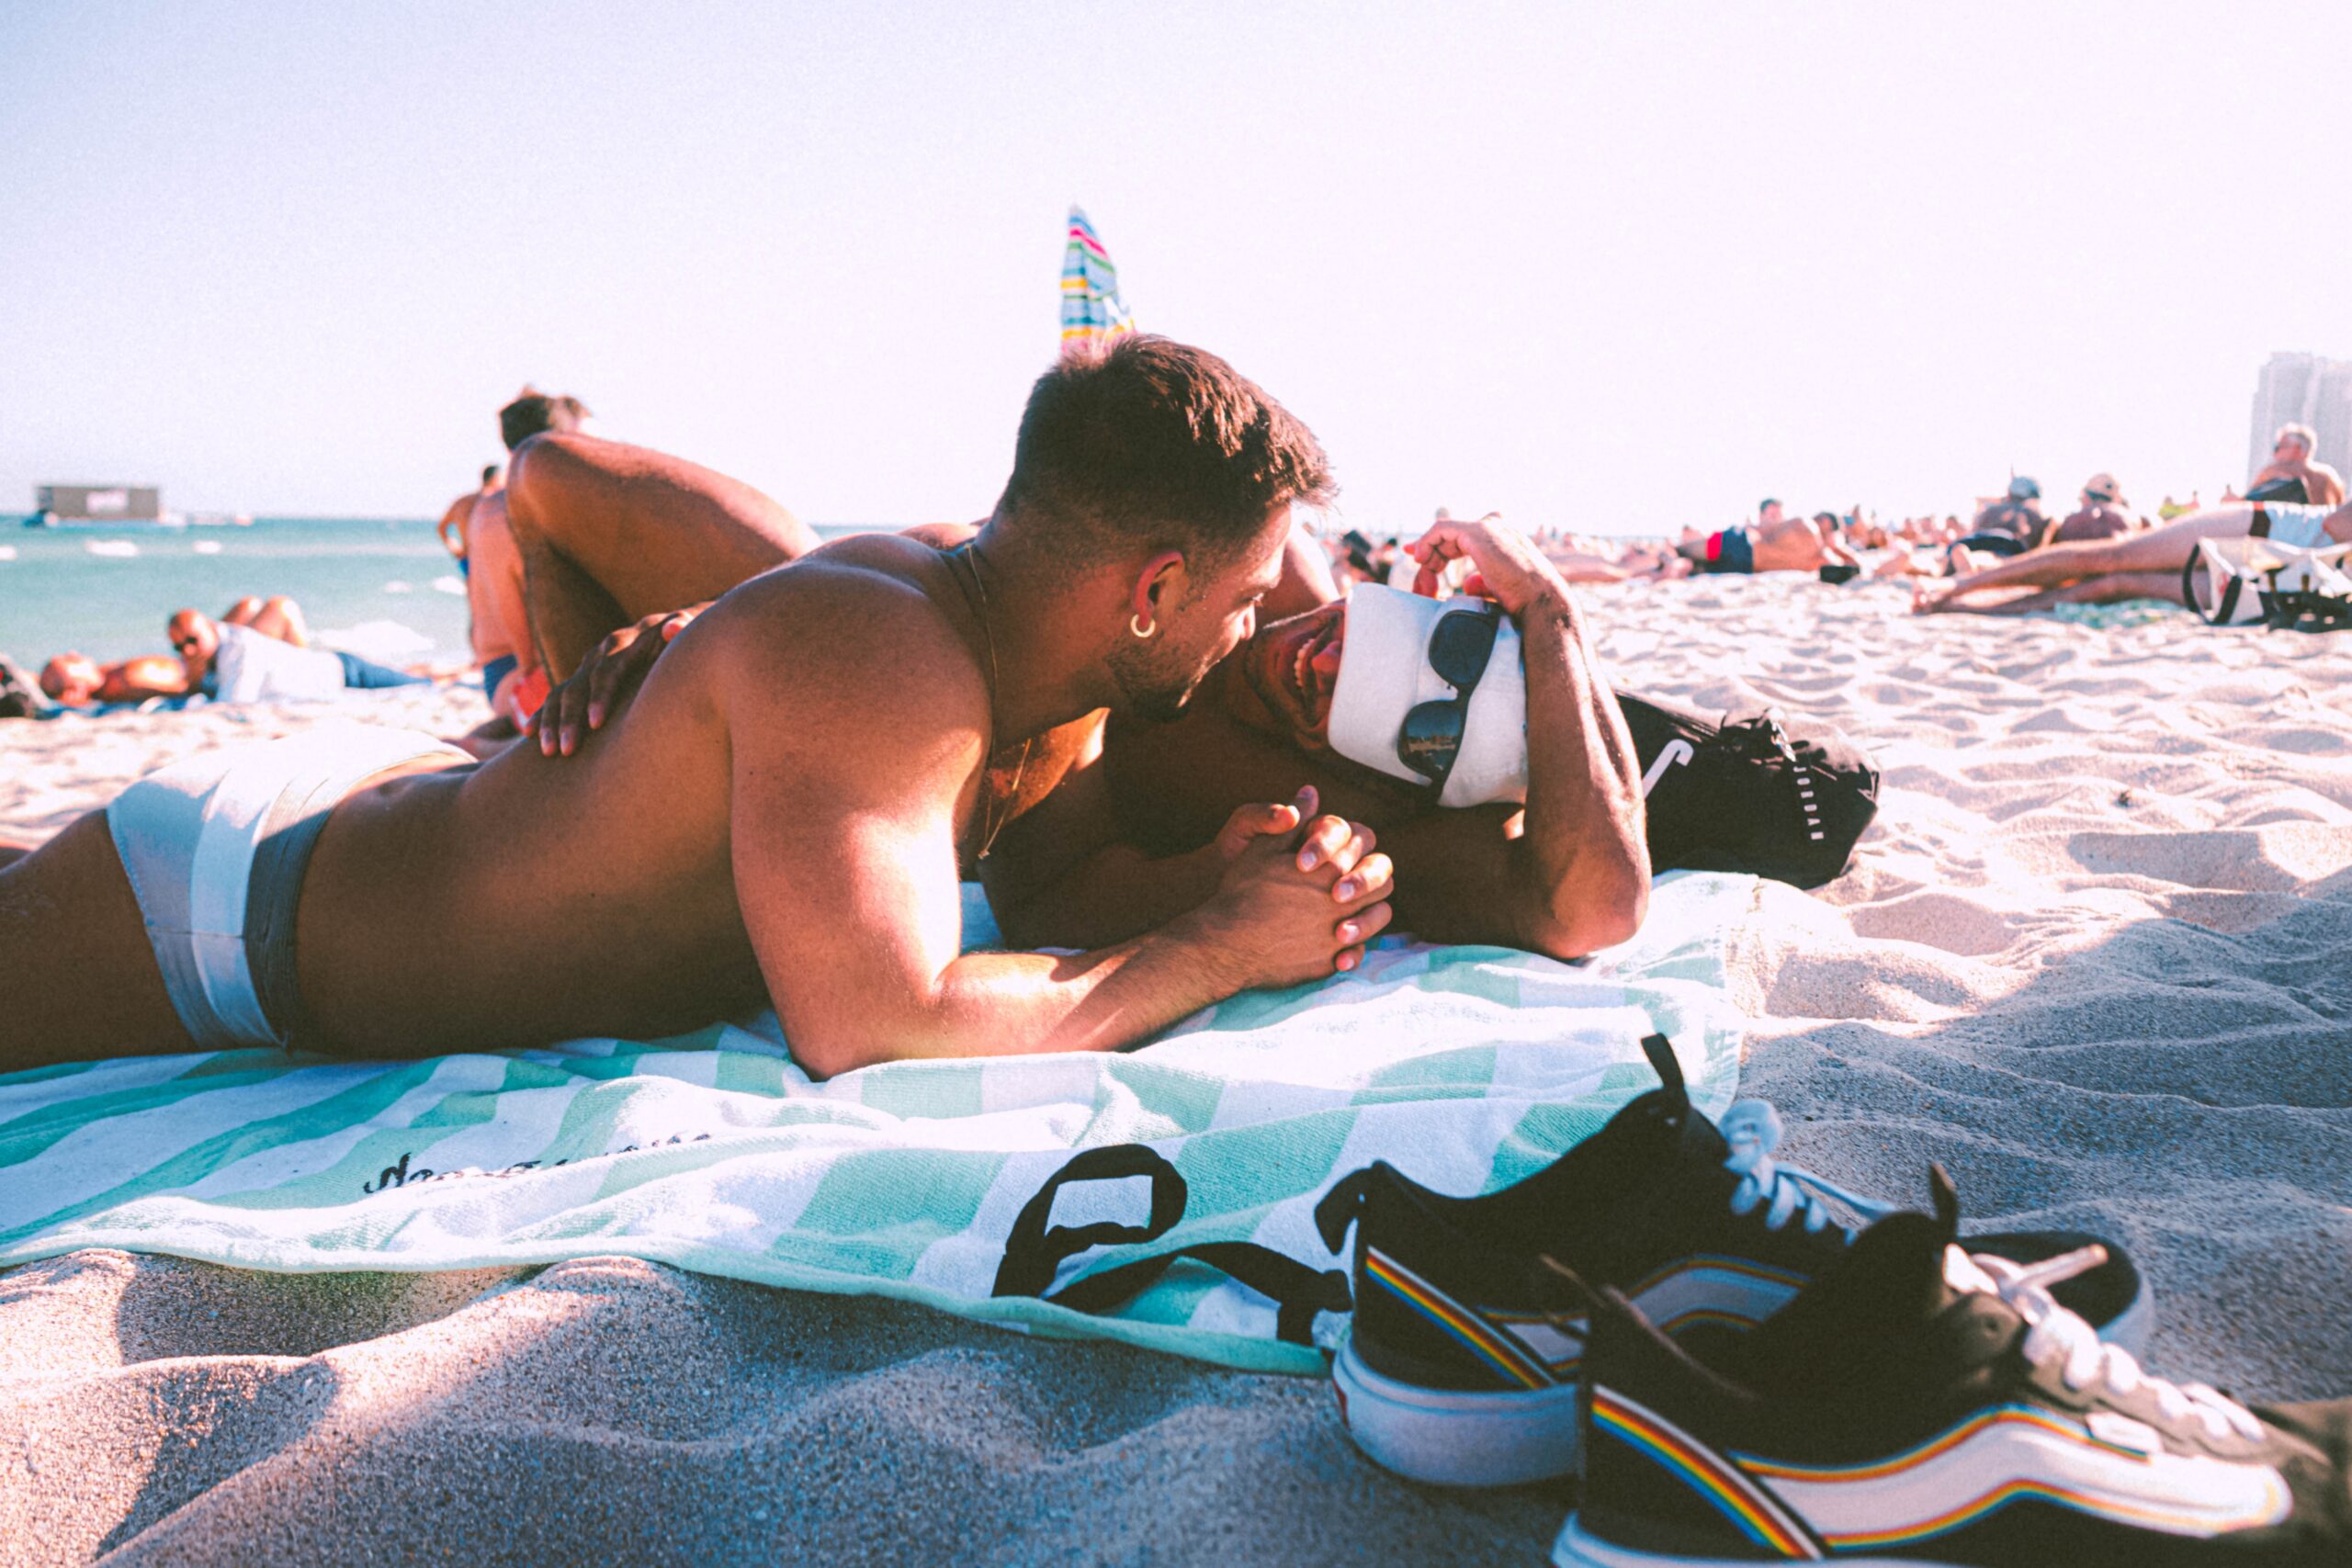 A simple guide to enjoying gay beach culture pic